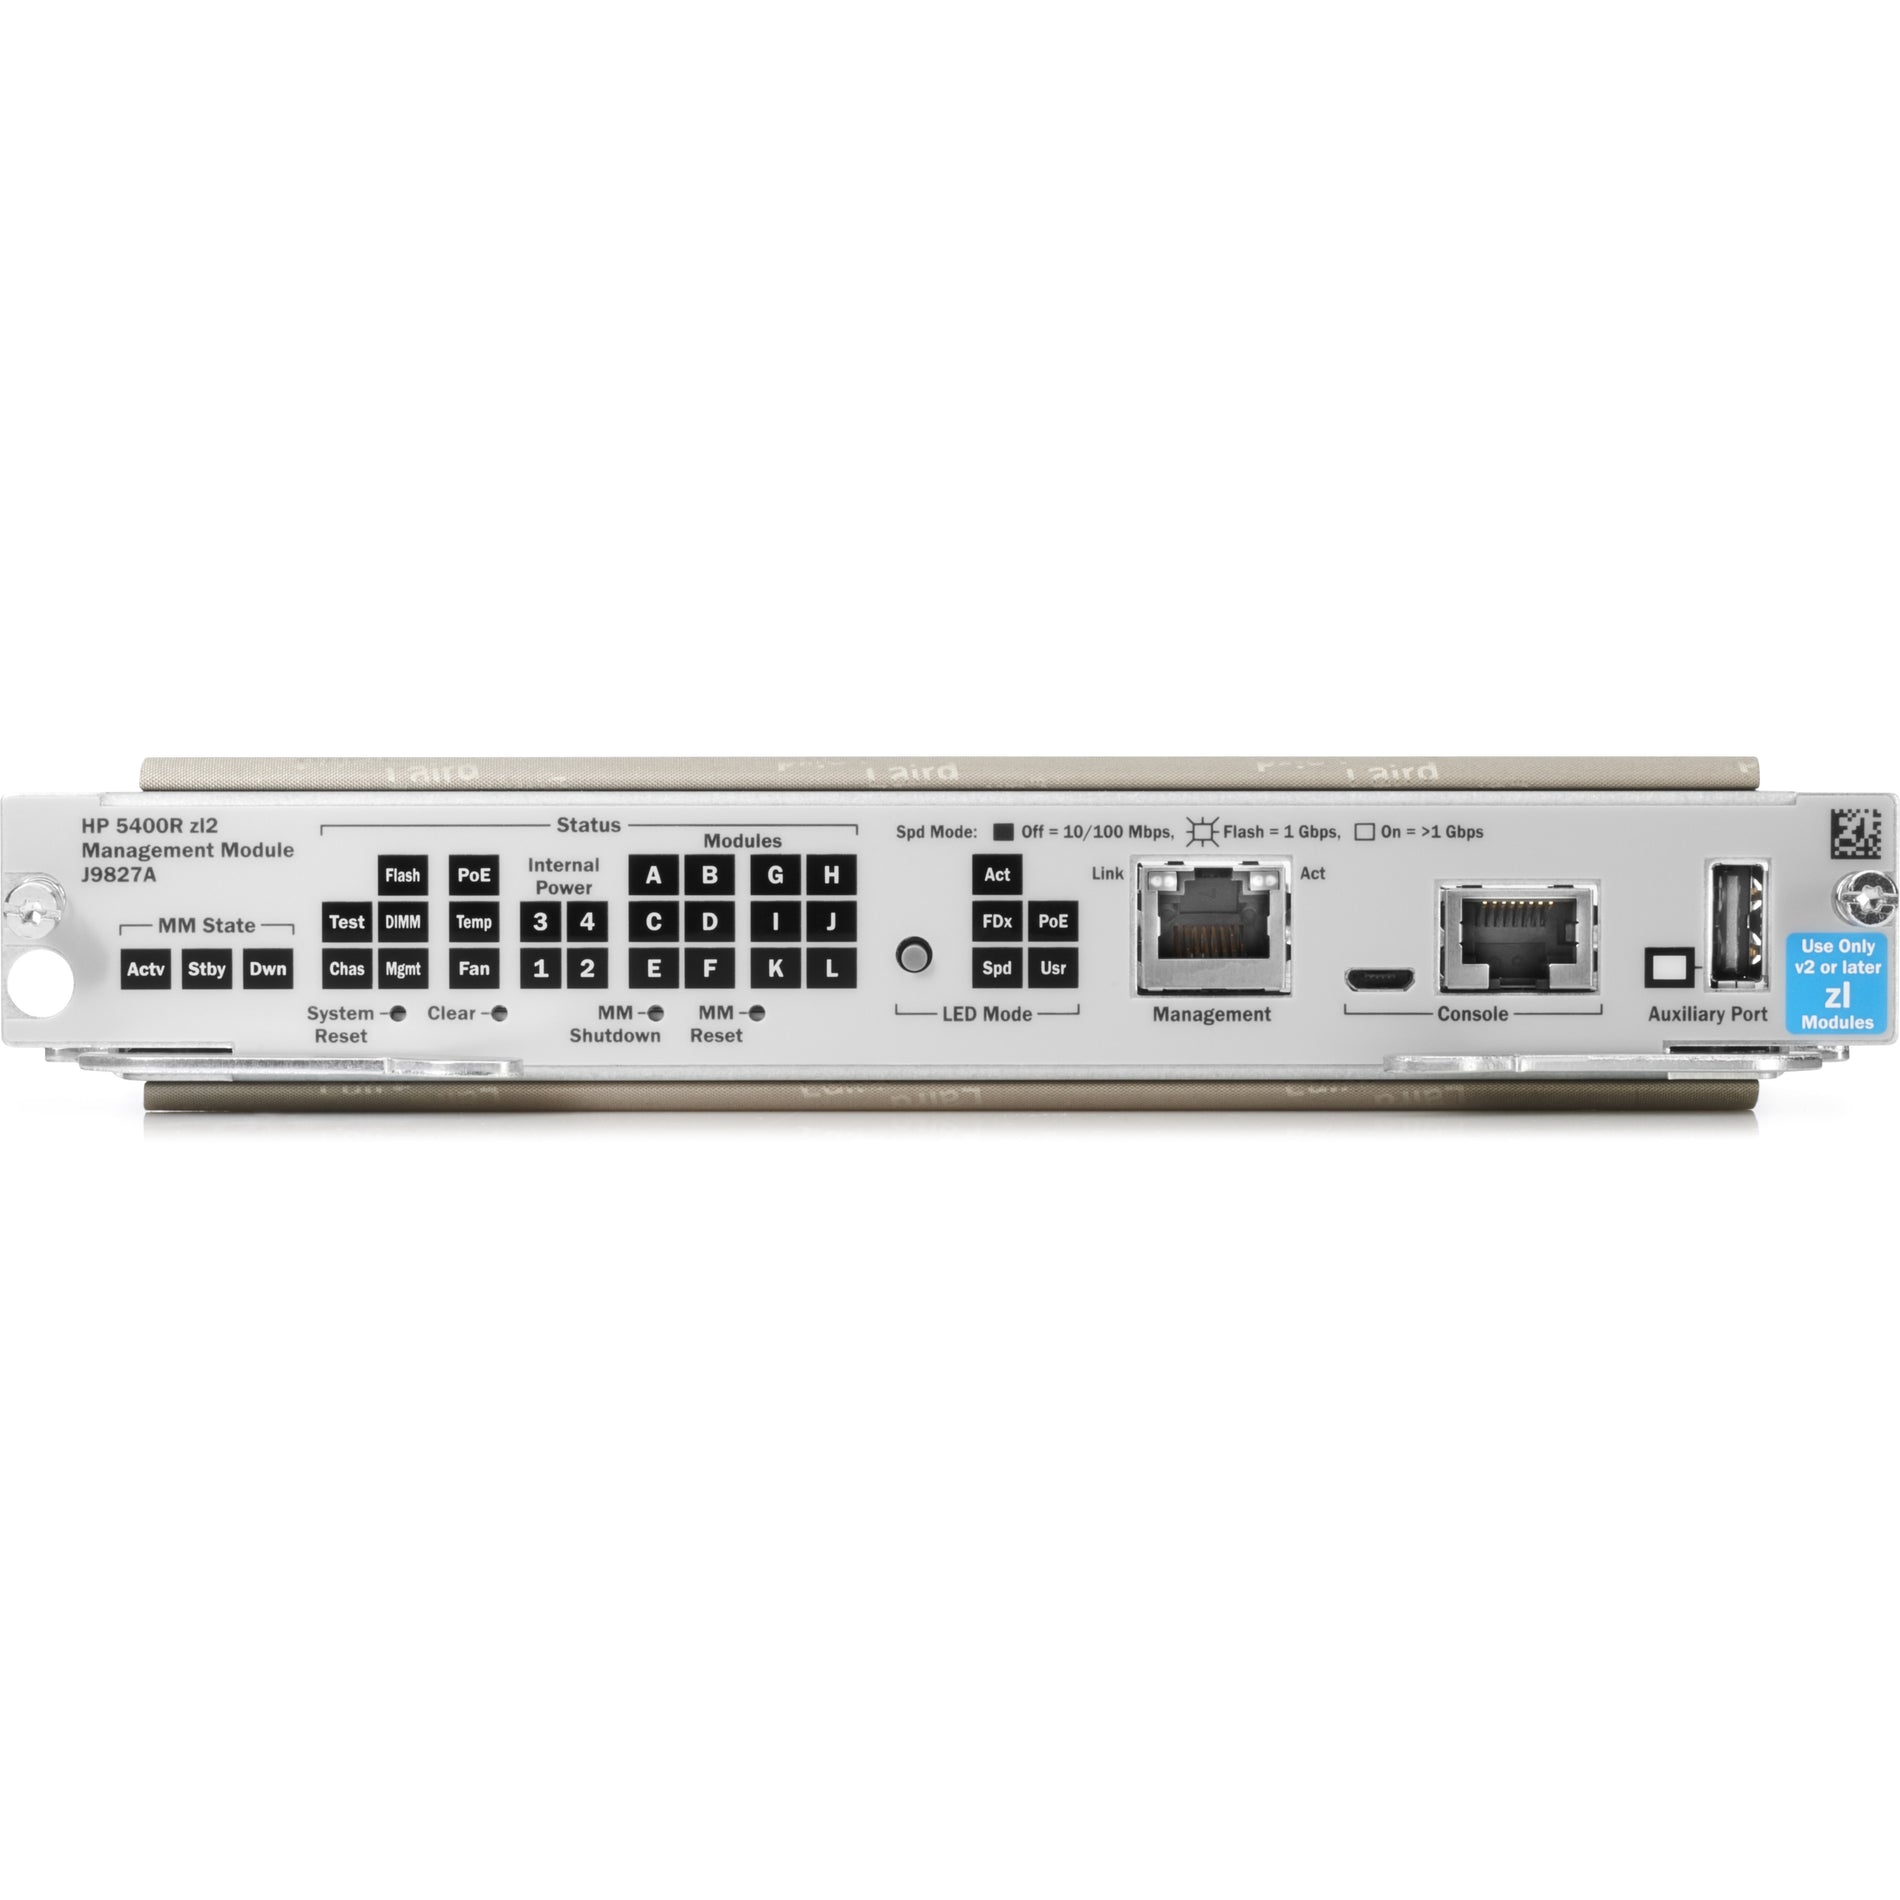 HPE J9827A 5400R zl2 Management Module, USB Management for HP 5400R Series Switches